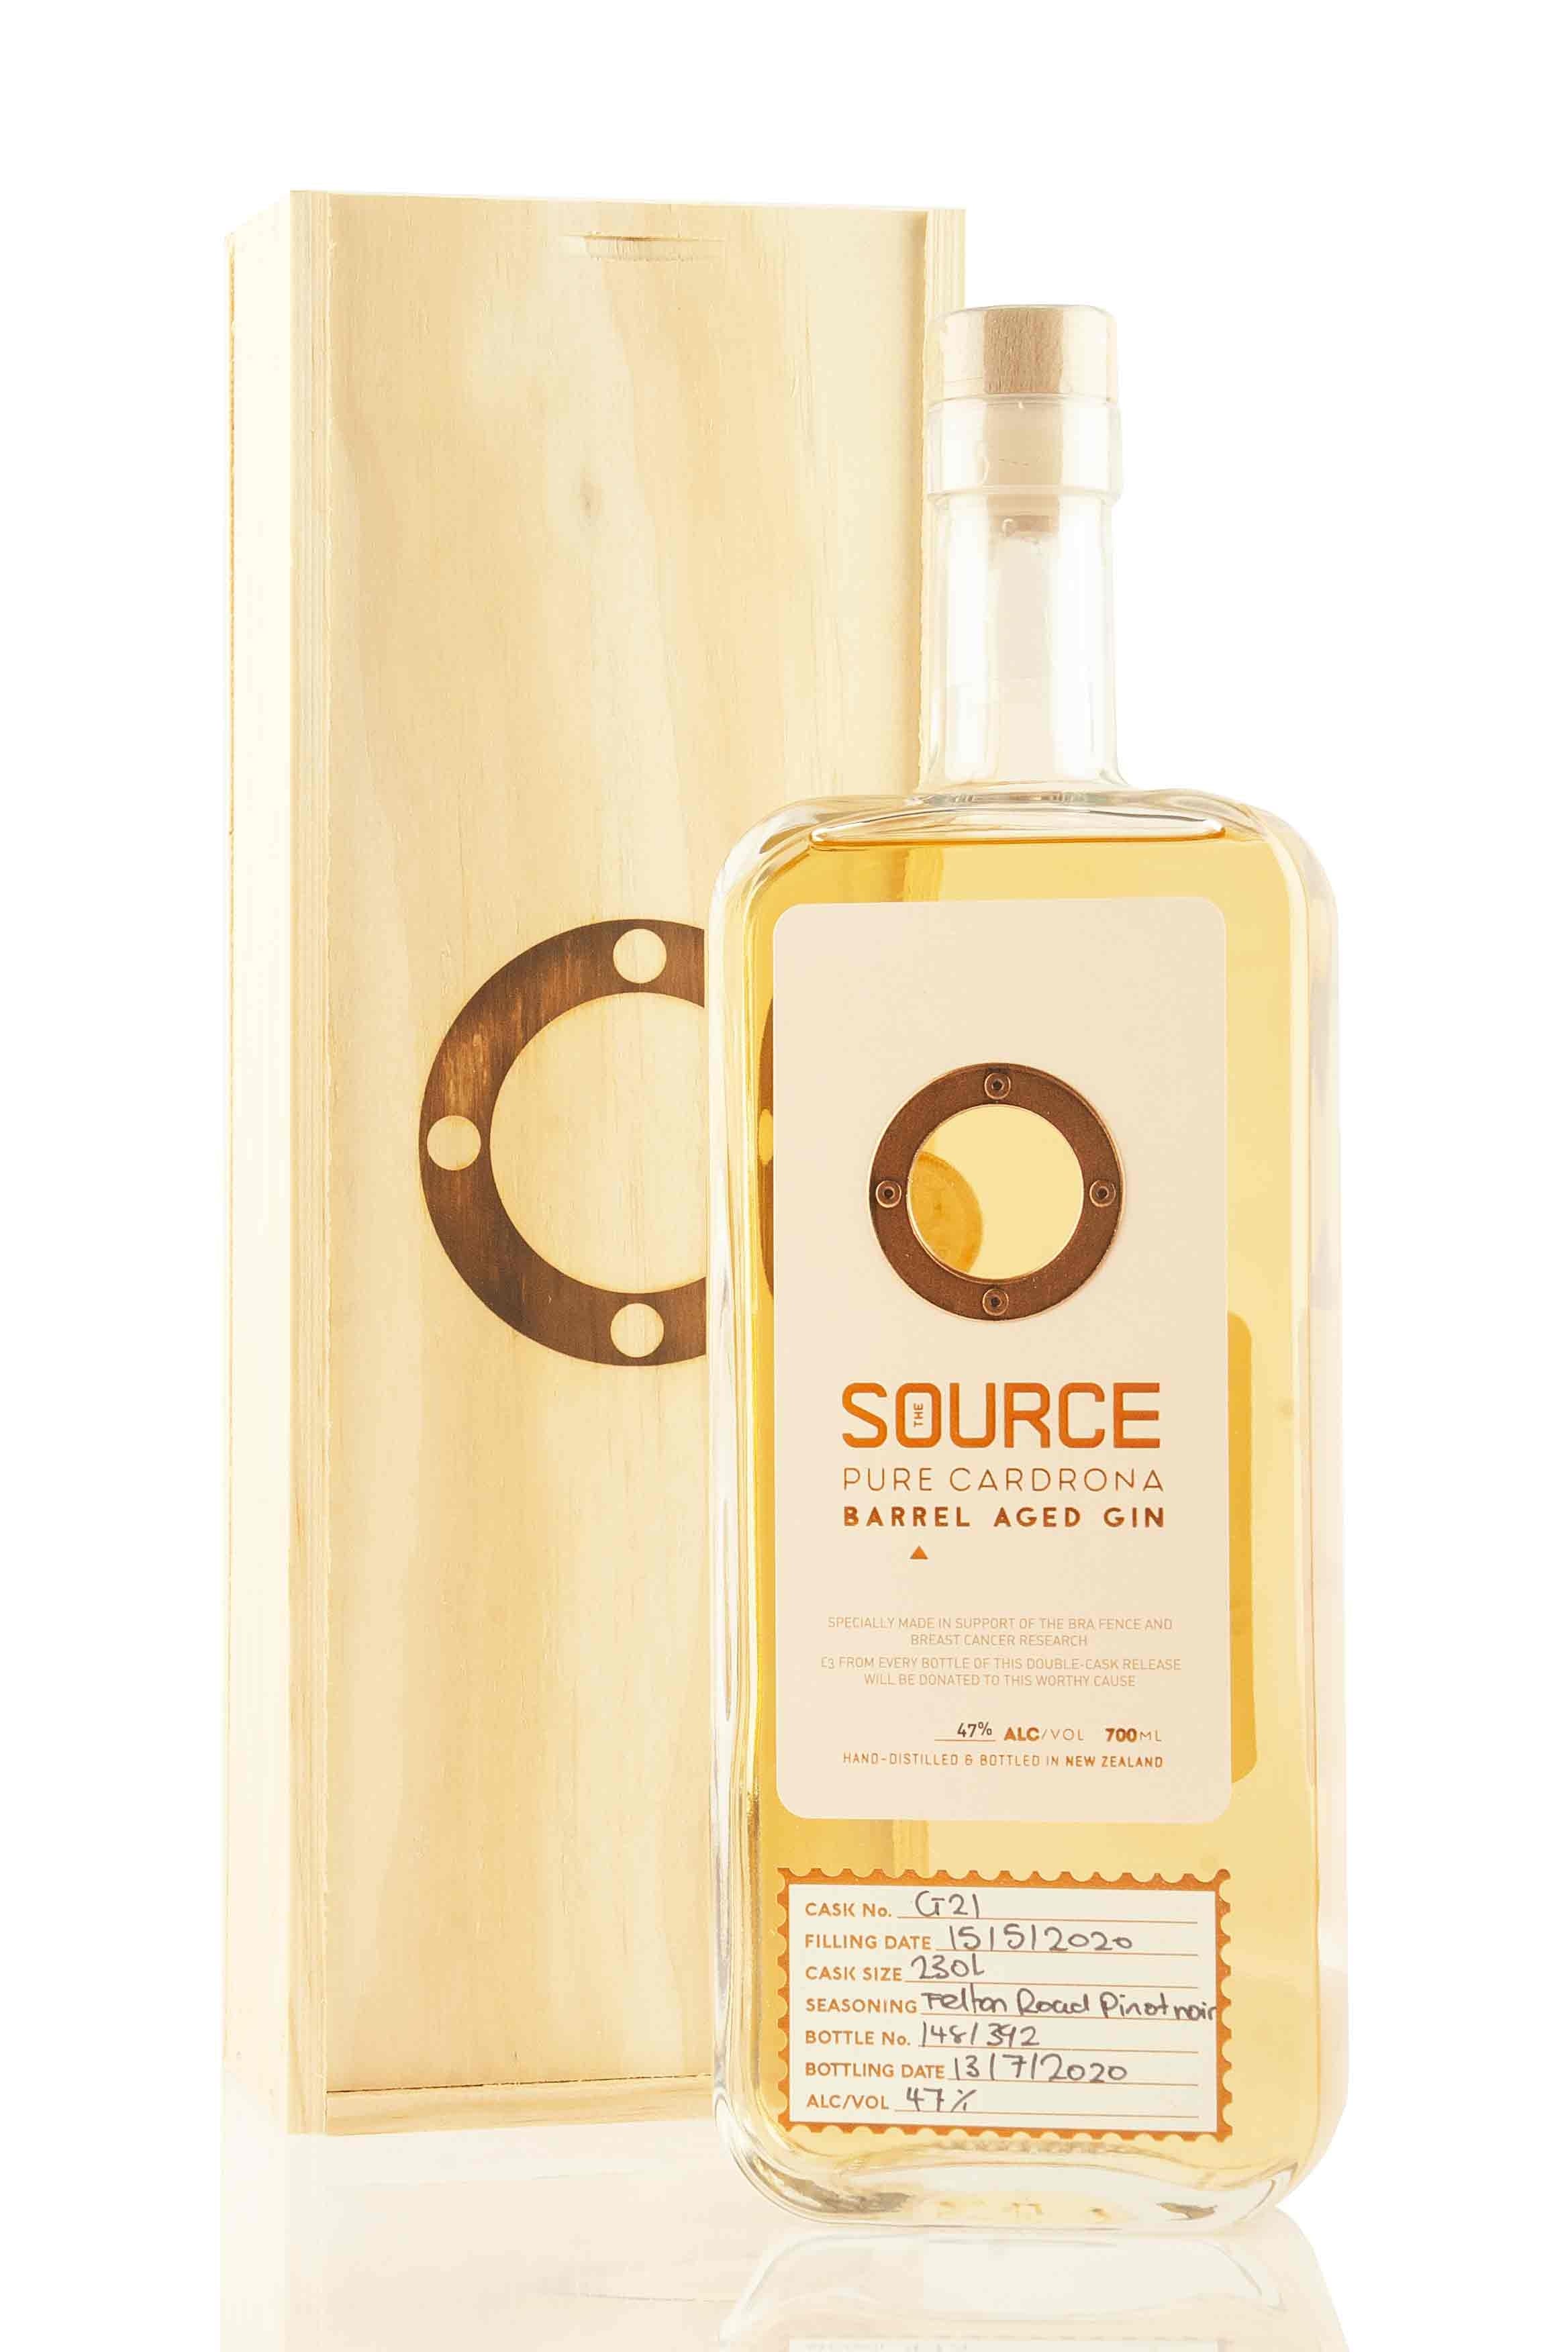 The Source Barrel Aged Pink Gin | Cardrona Distillery